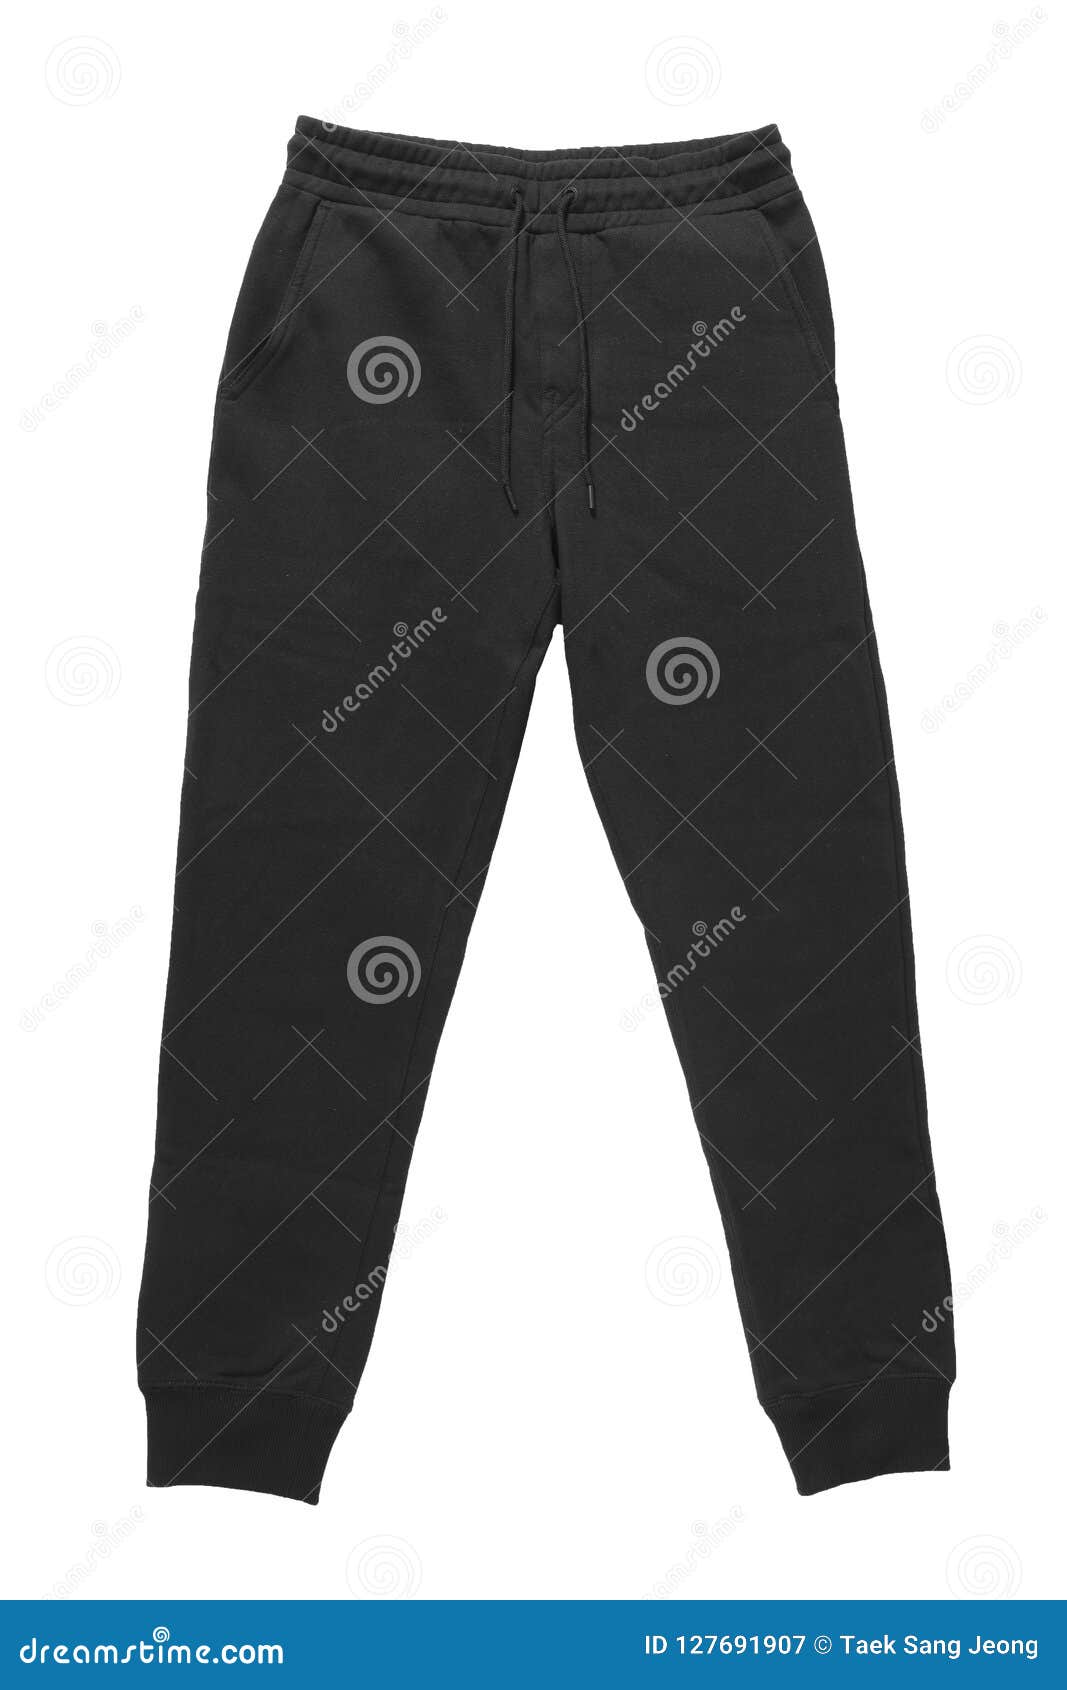 Blank Training Jogger Pants Color Black Front View Stock Image - Image ...